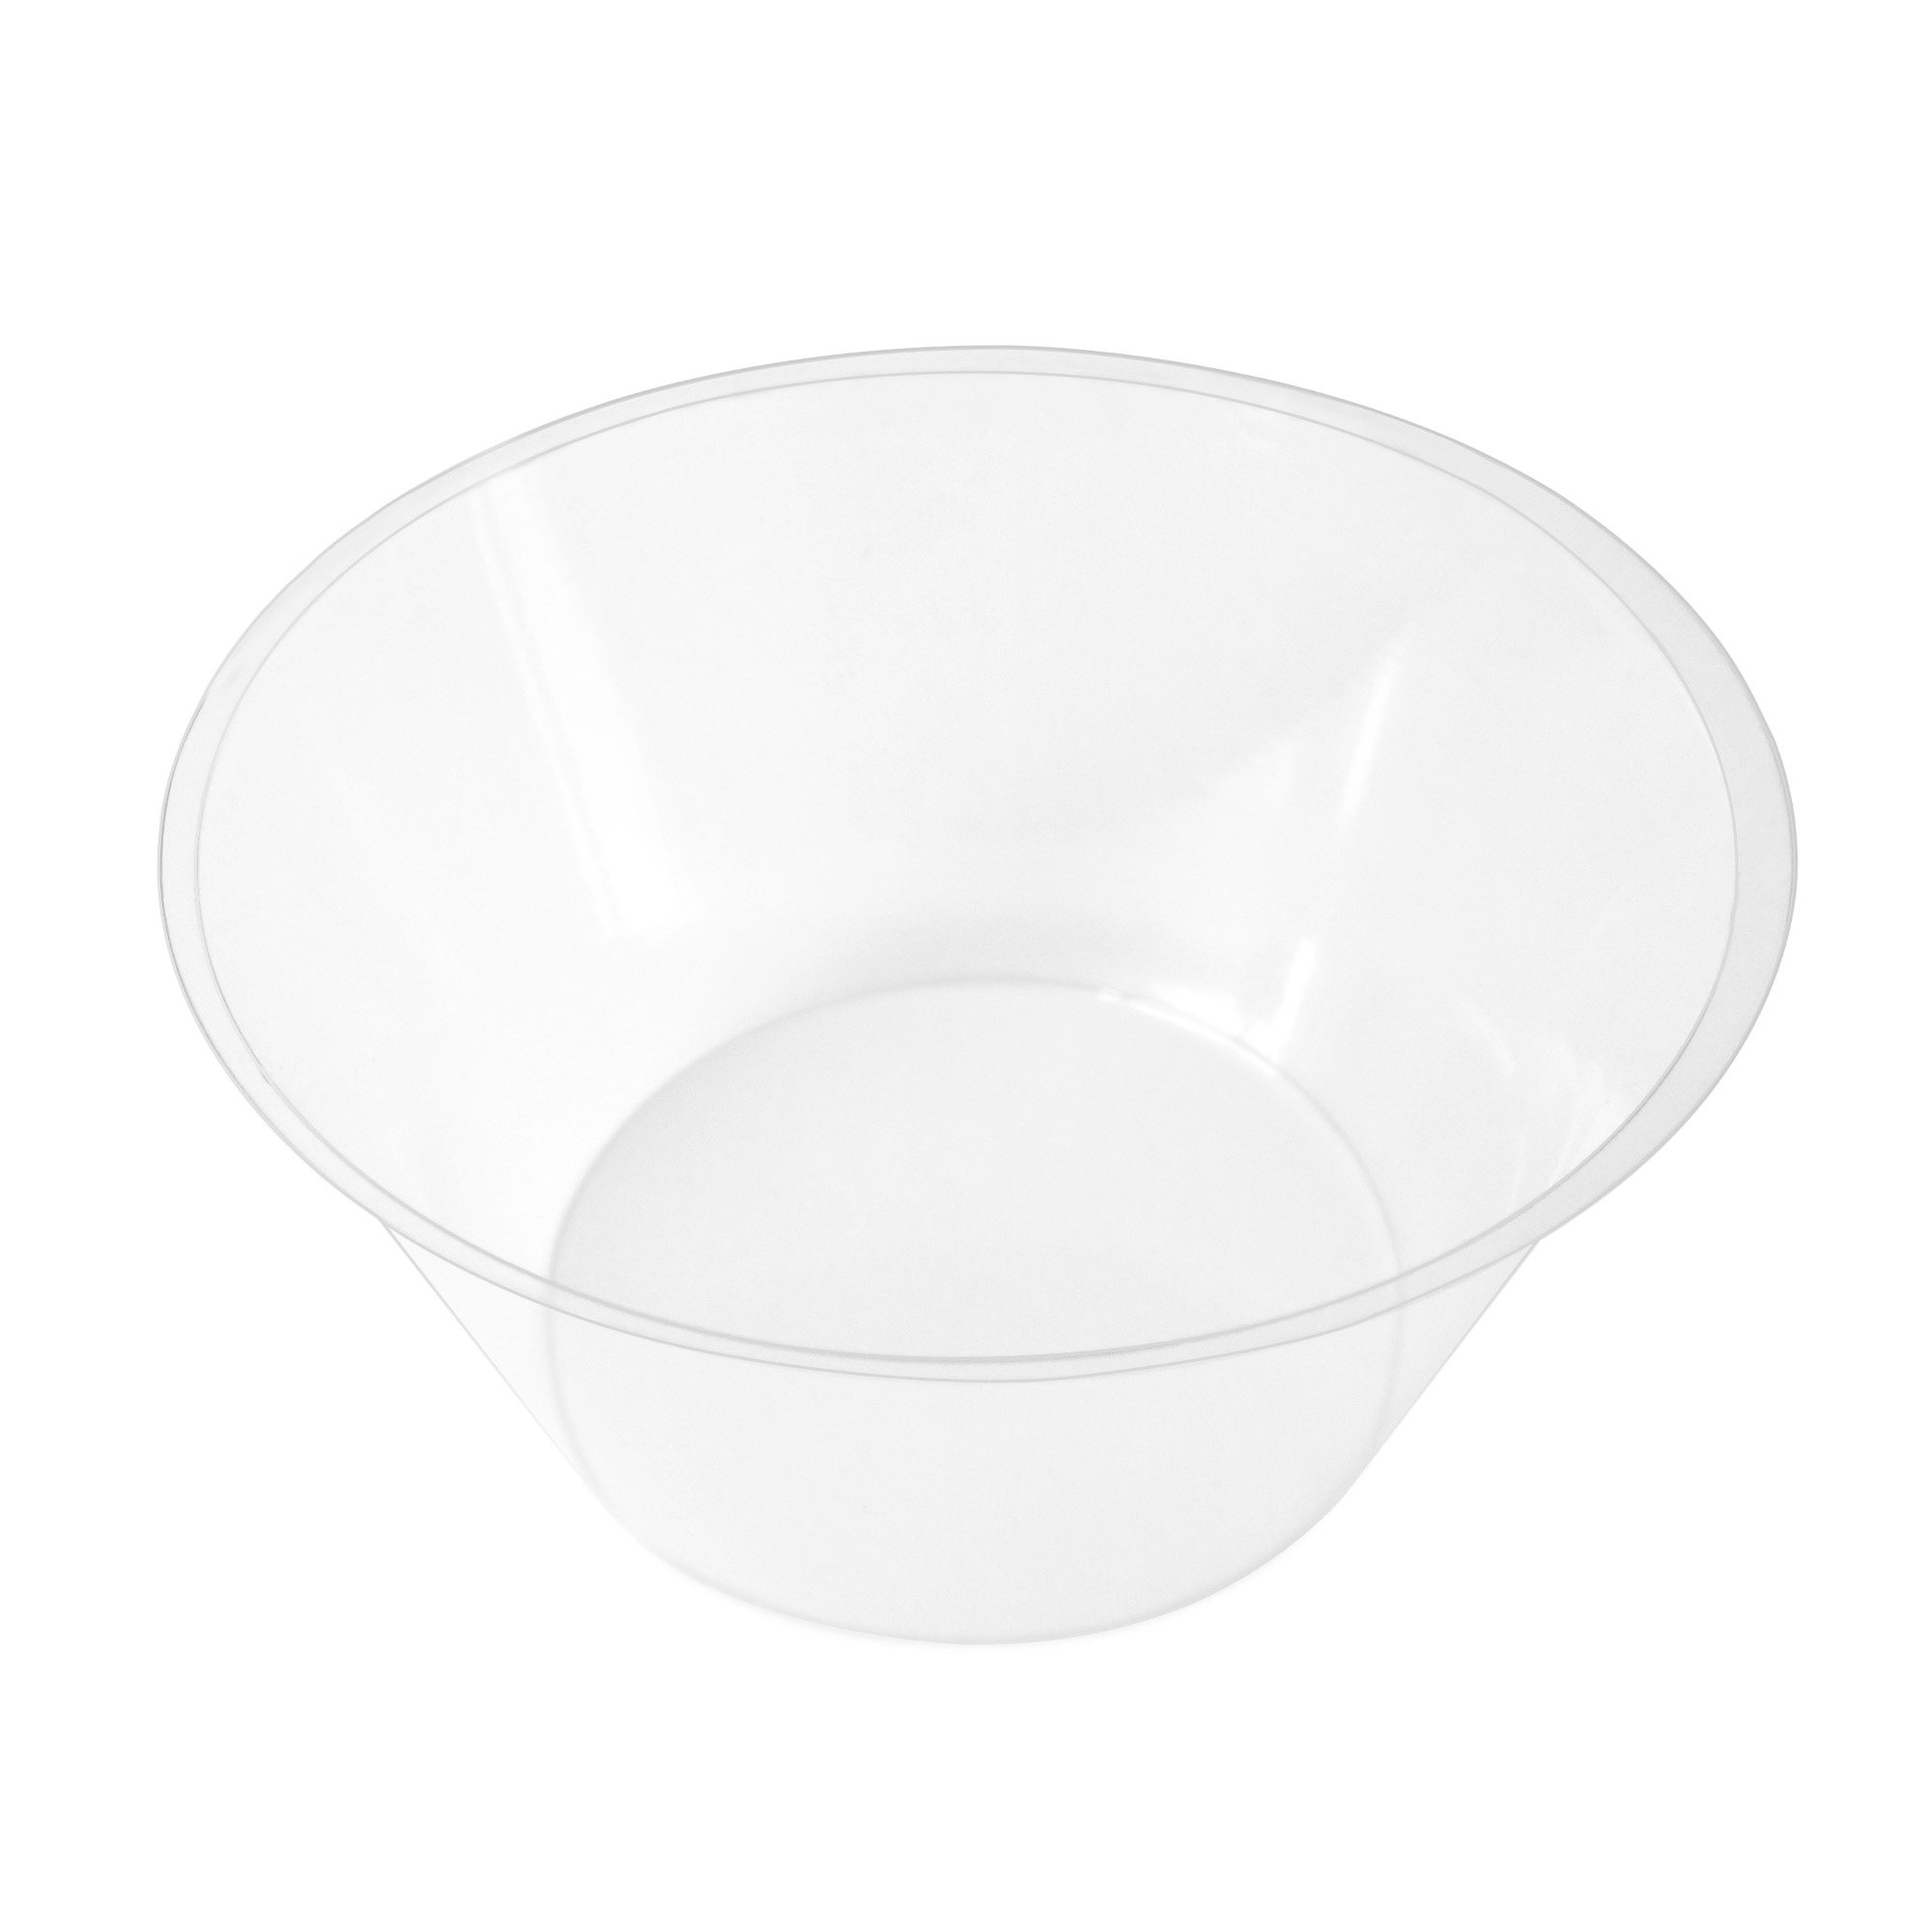 Hygienic and practical disposable manicure bowls, 100% recyclable 80 pcs